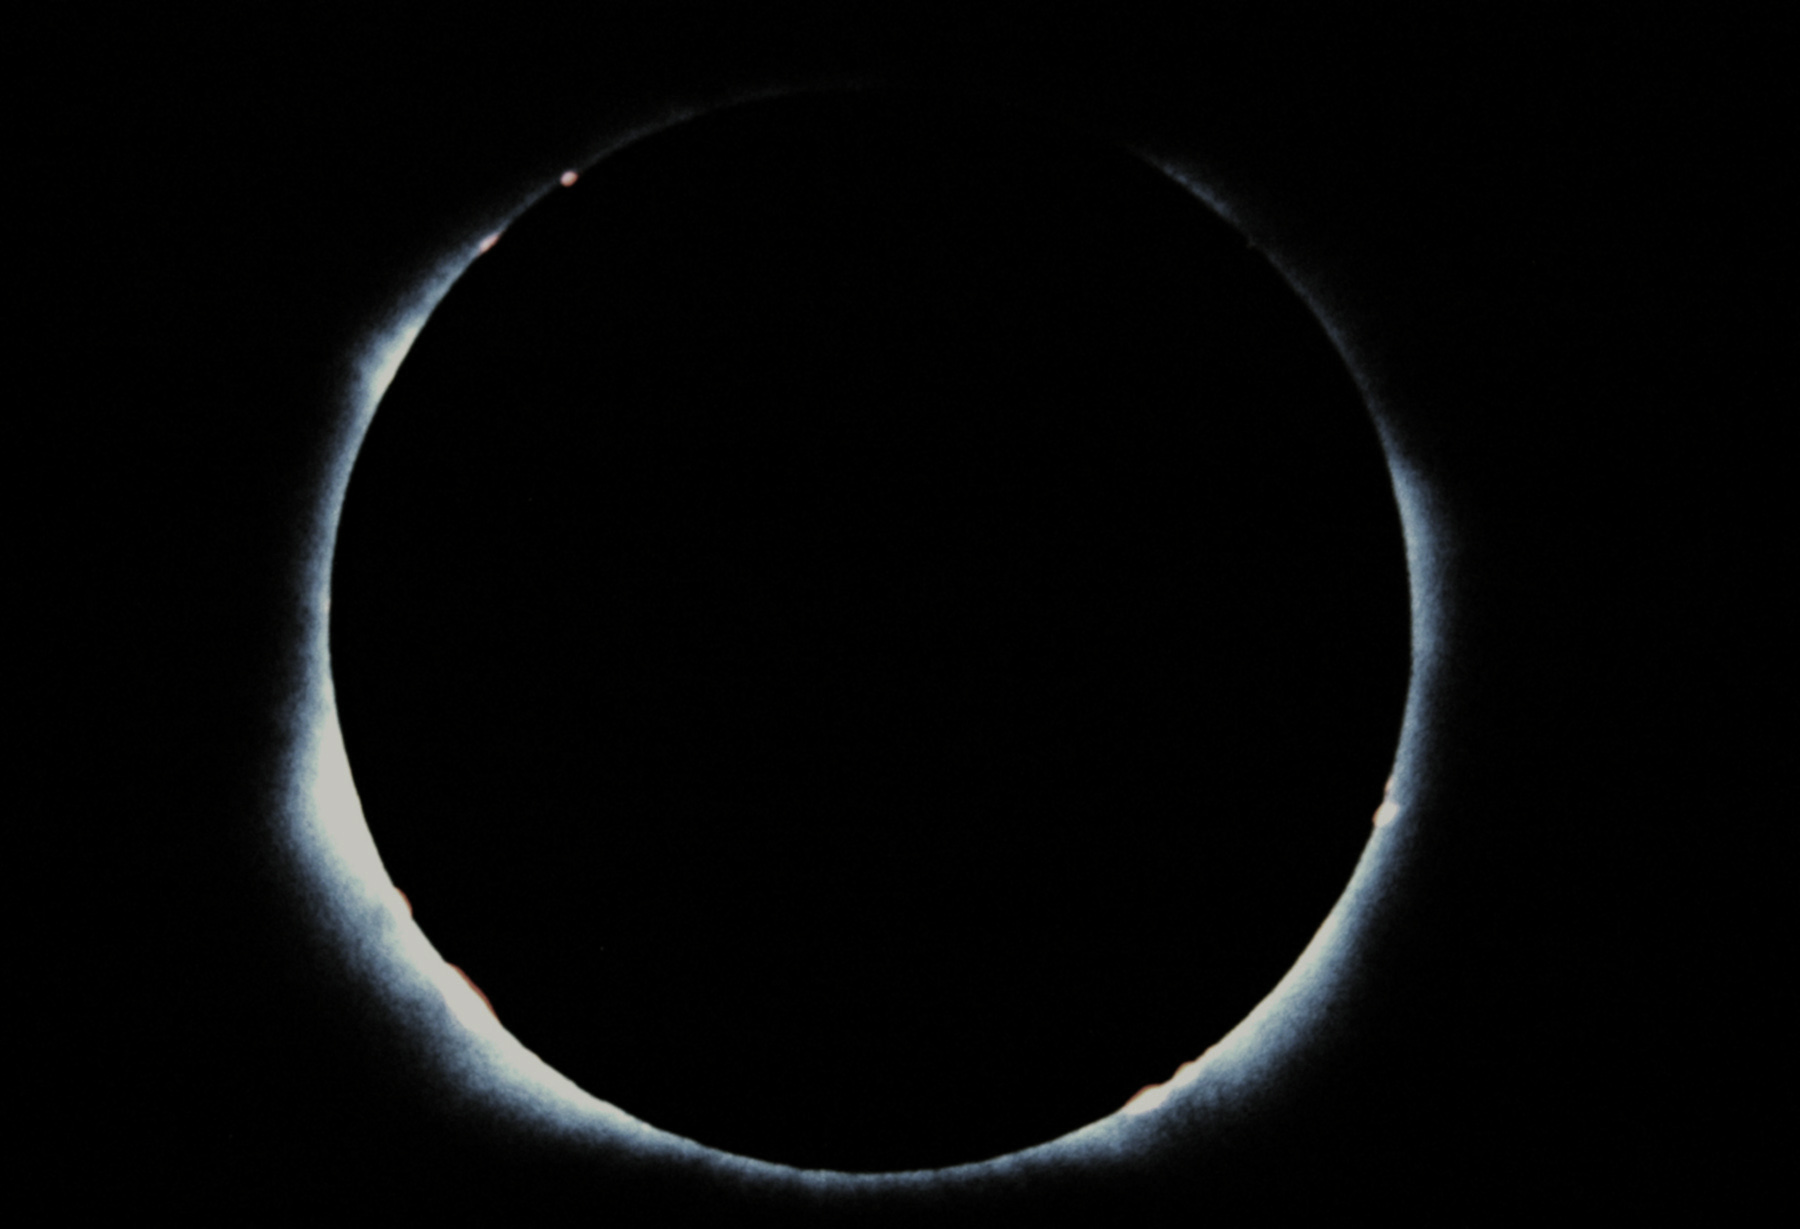 Eclipse 1977 - A50 - Totality - Full Disk